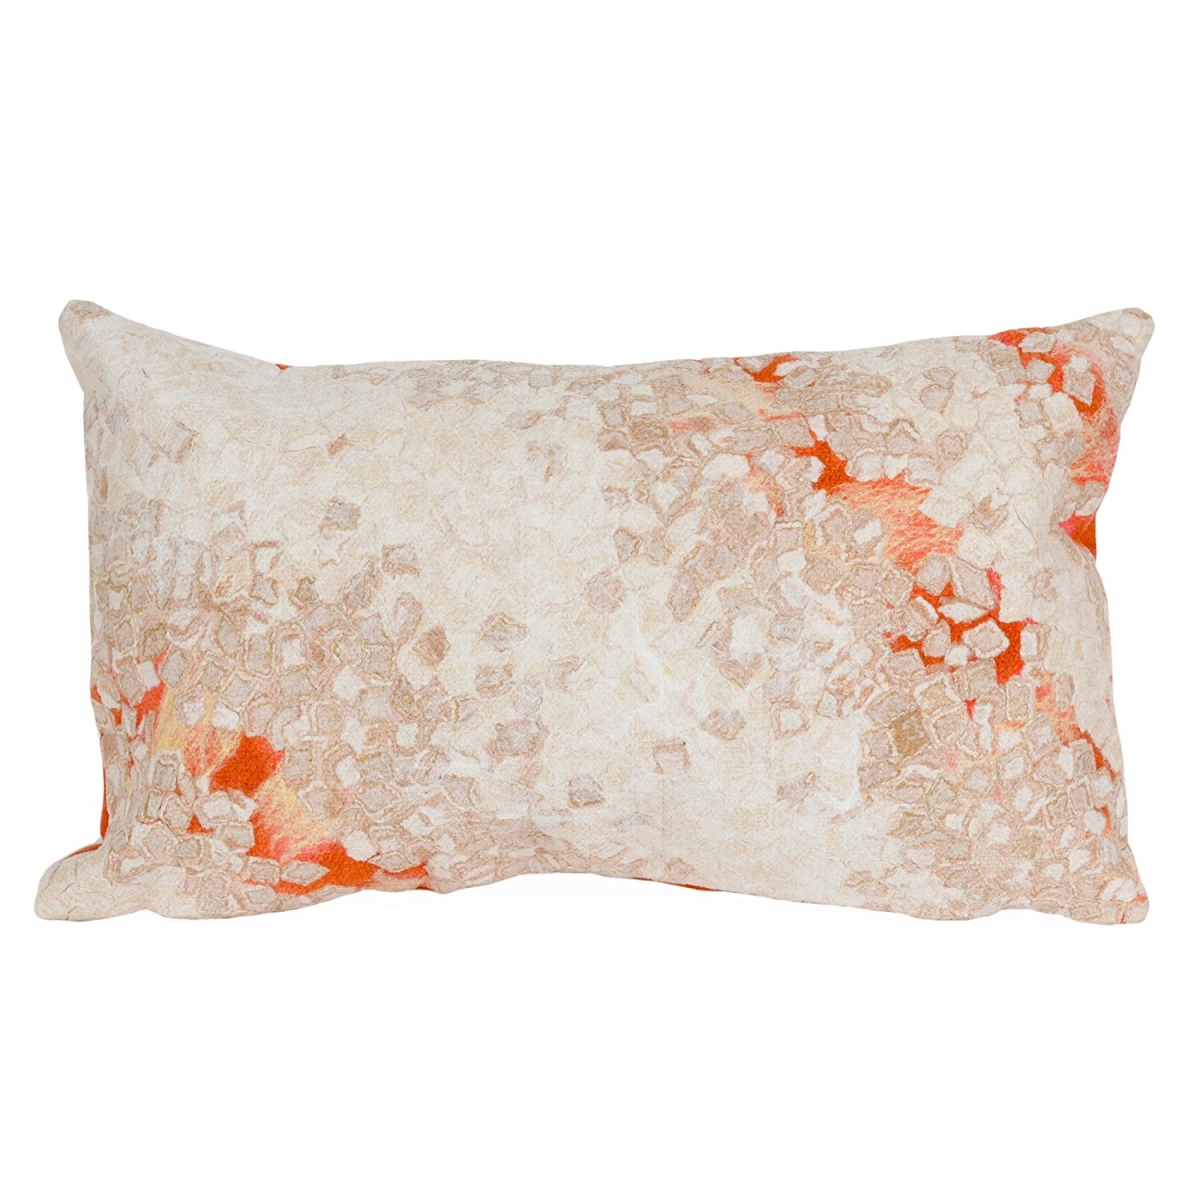 Trans Ocean 7sc1s412624 Visions Iii Hand Made Square Pillows, 4126-24 Elements Warm Orange - 12 X 20 In.